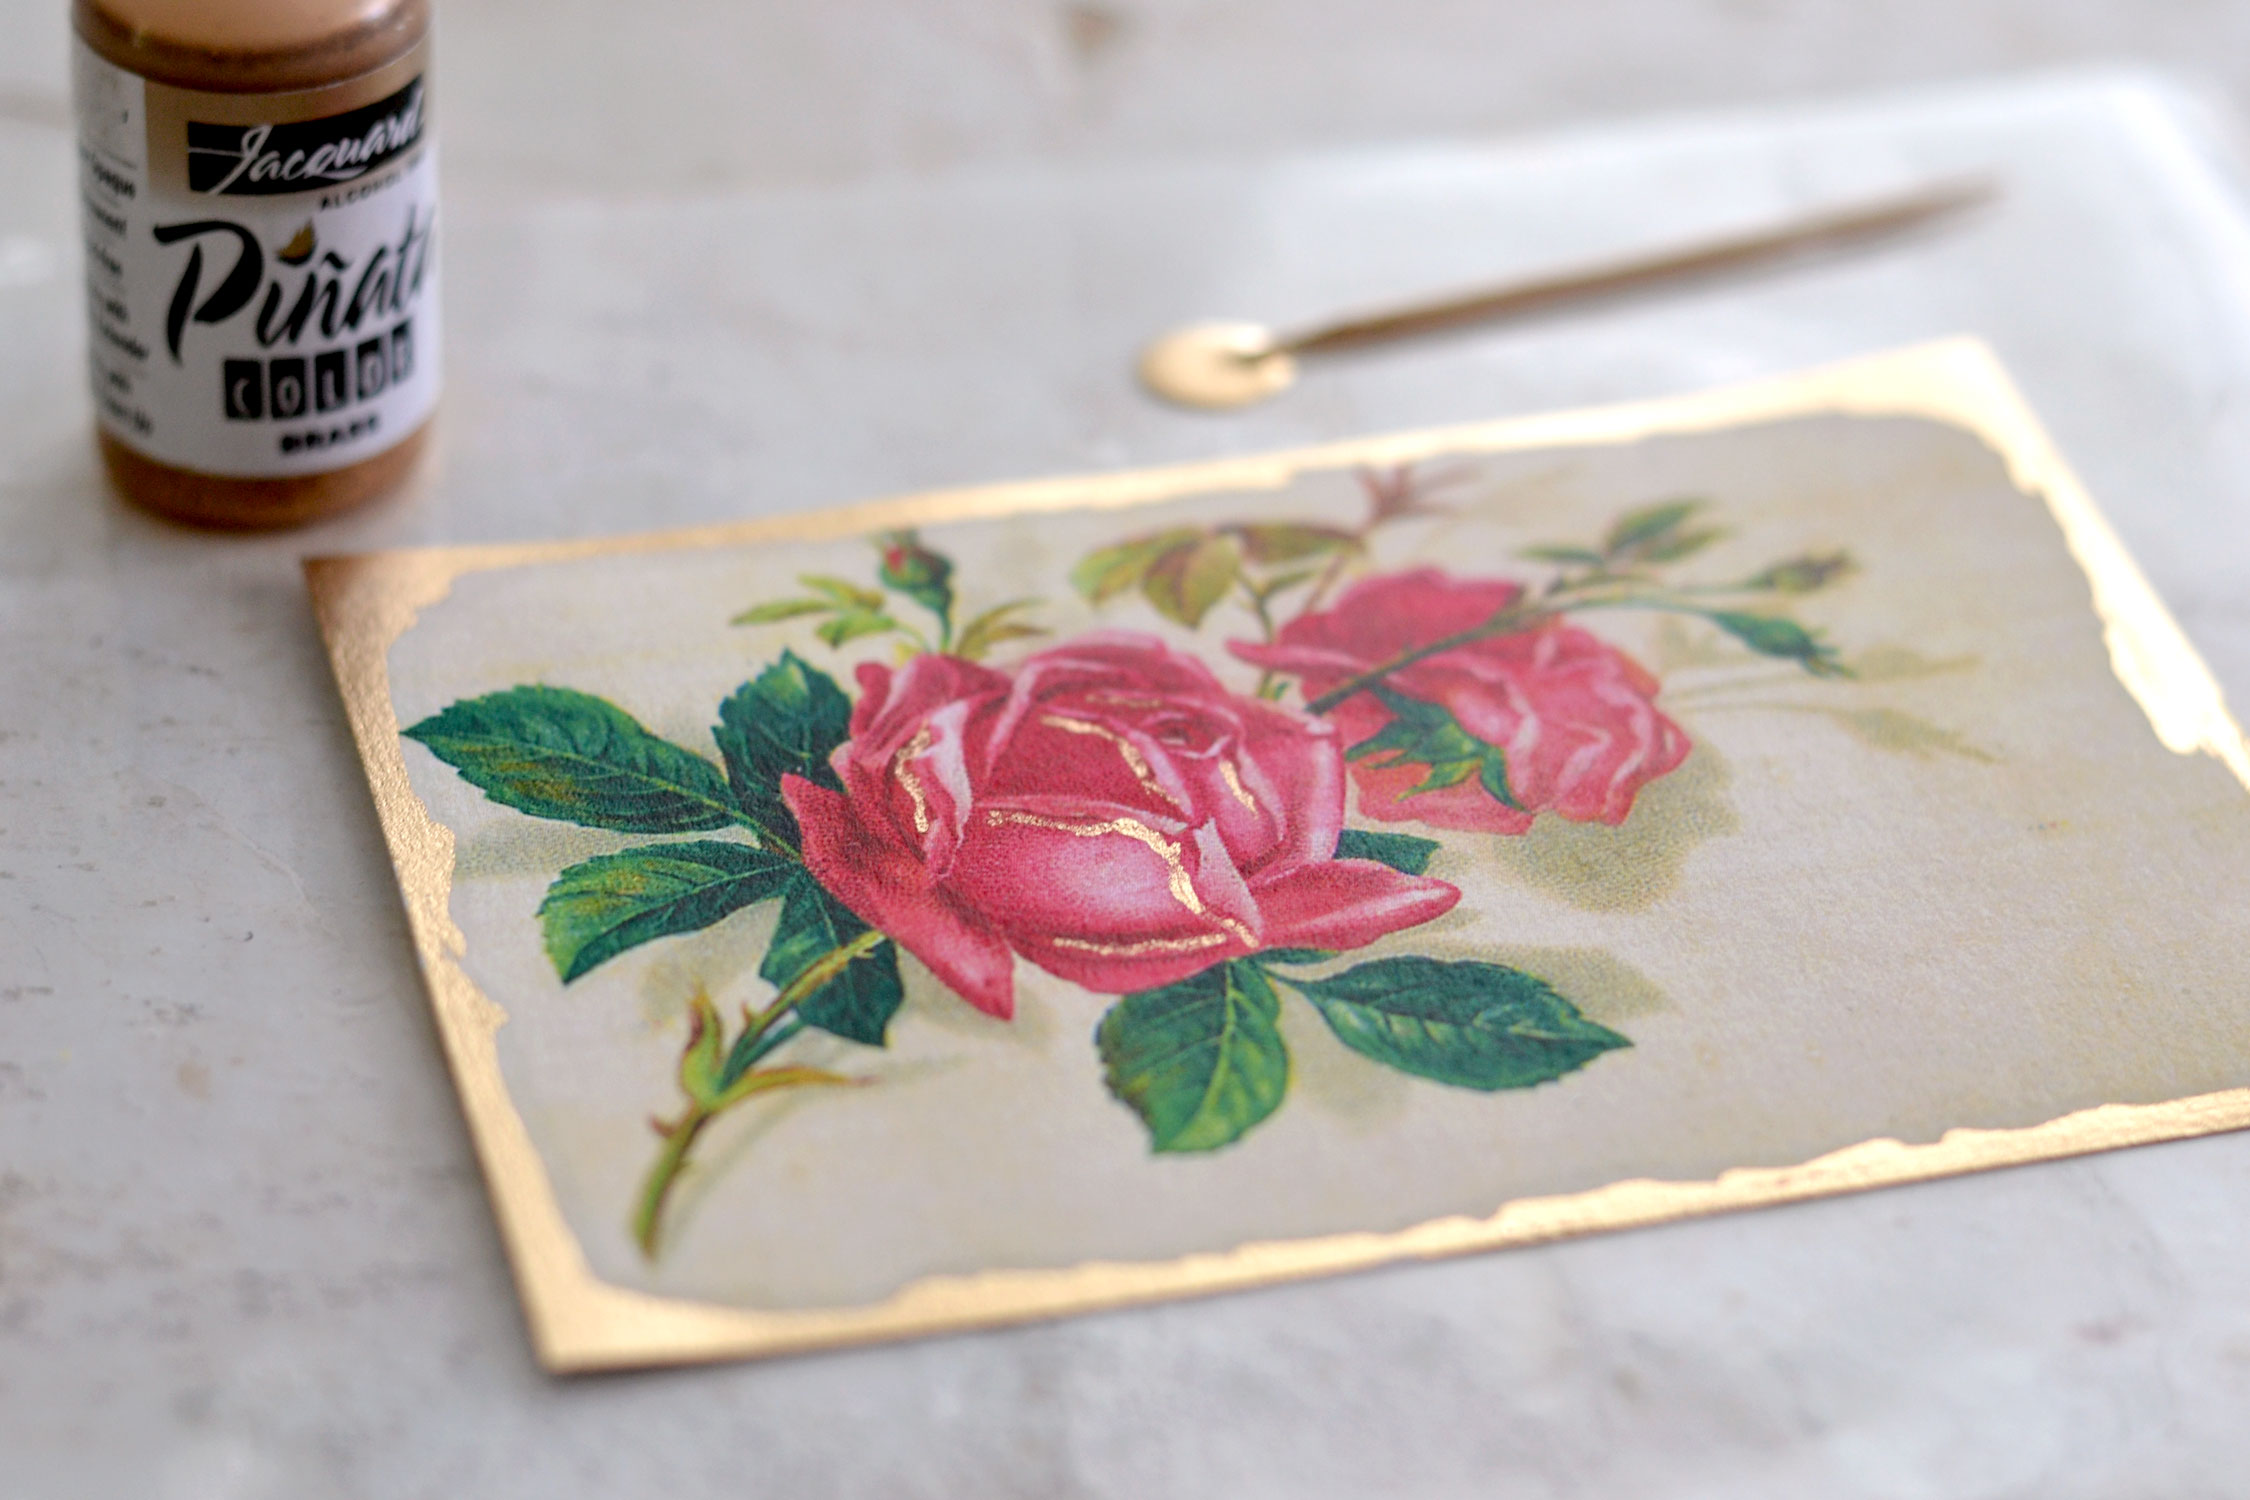 paint with gold using a skewer